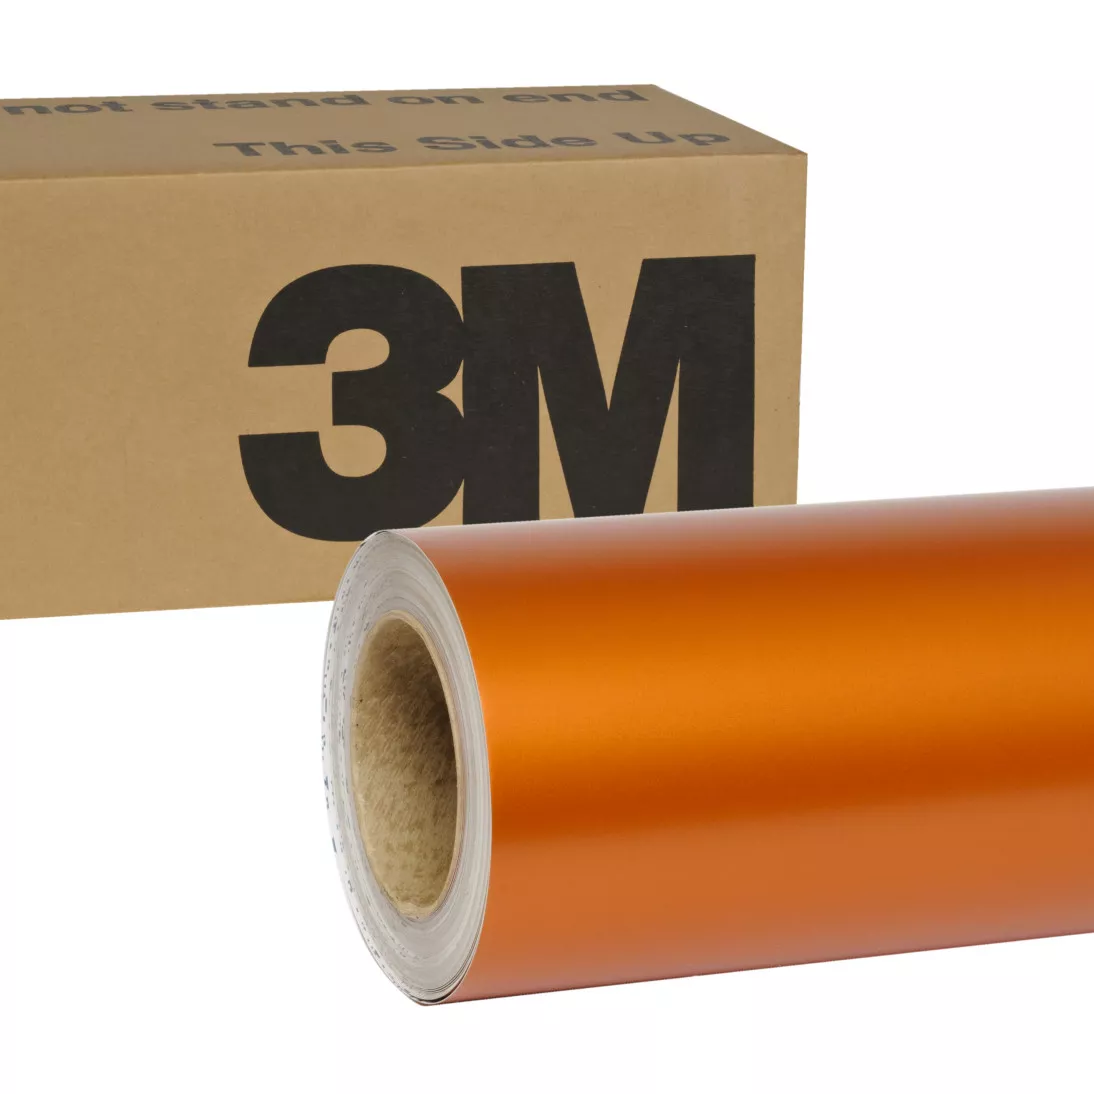 3M™ Wrap Film 2080-S344, Satin Copper Canyon, 60 in x 25 yd